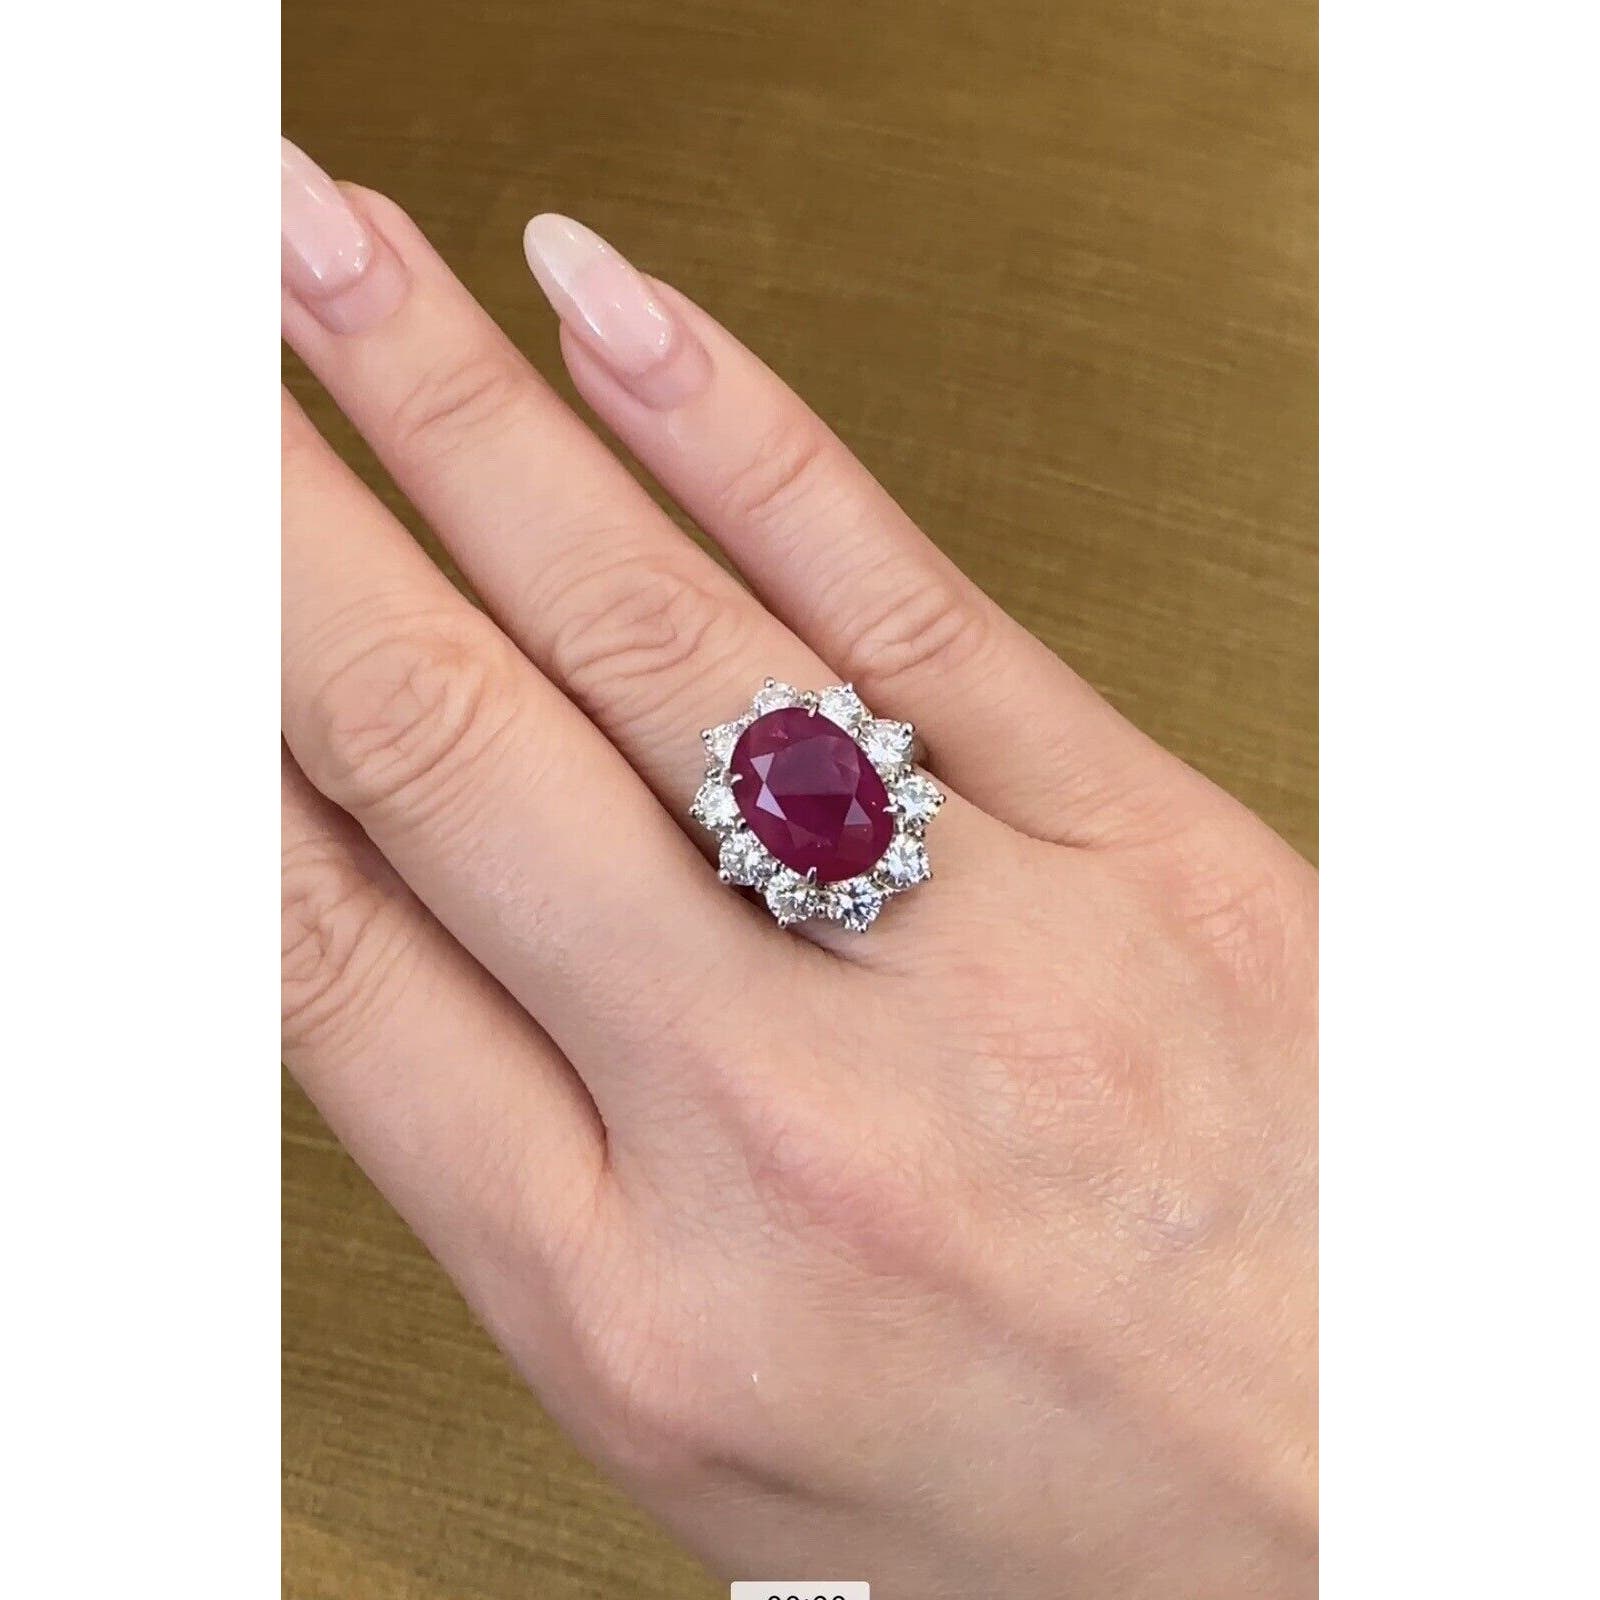 GIA Burma Heated Ruby 7.71 ct Oval in Diamond Platinum Ring - HM2421VN